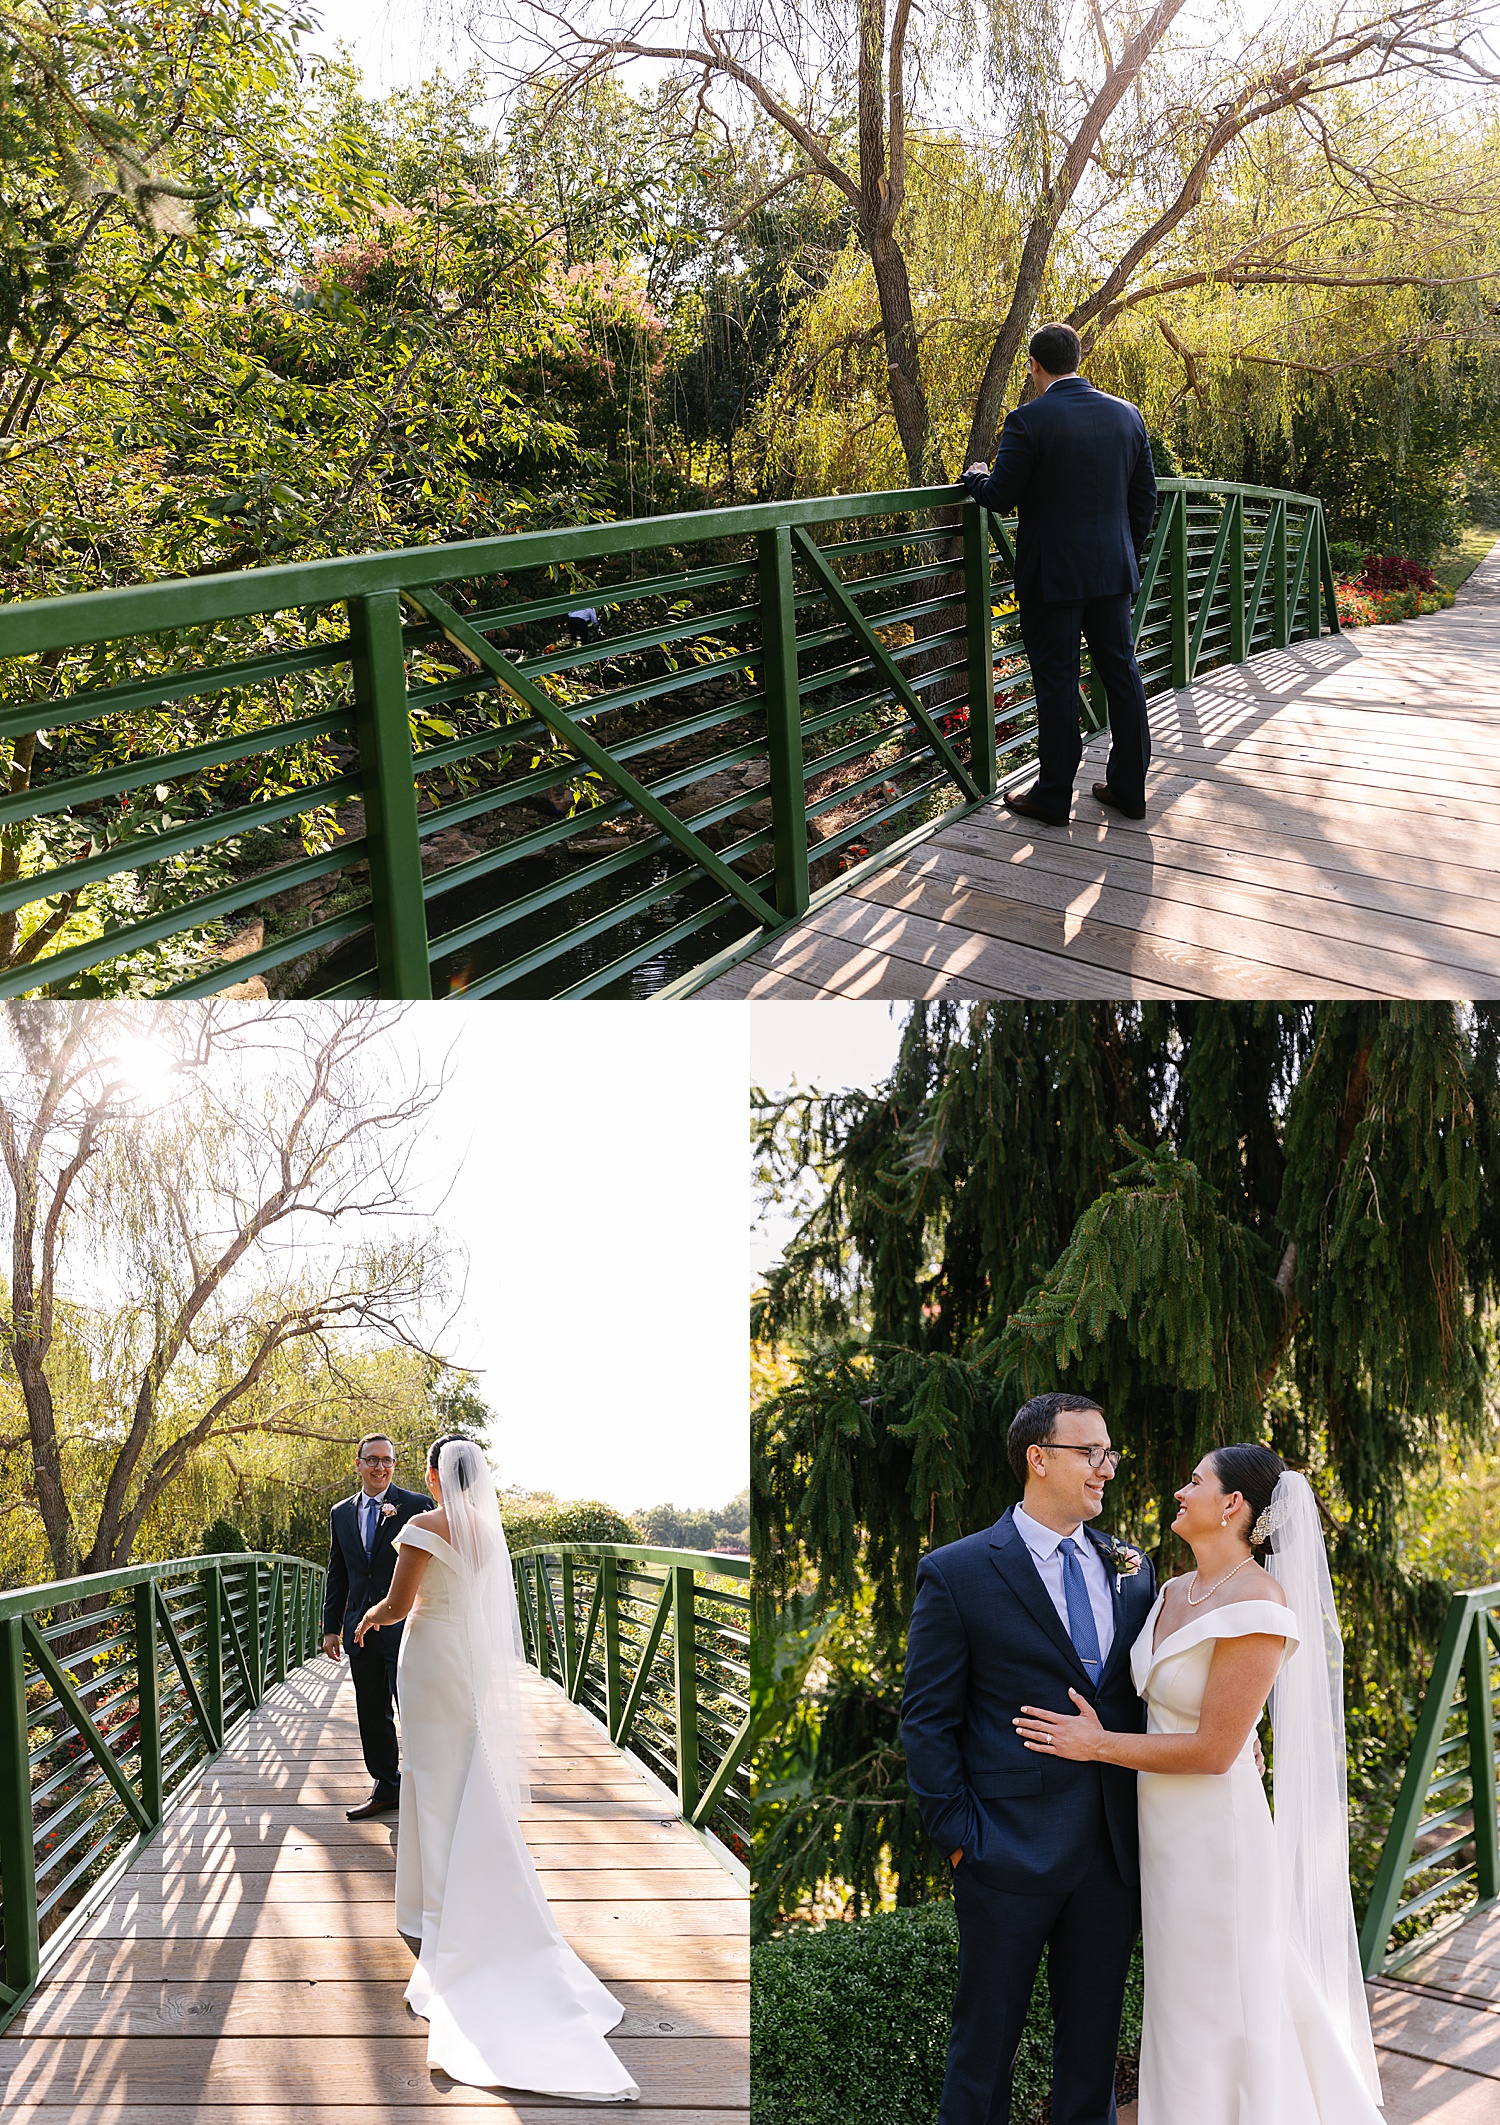 Bride and groom share first look with one another on bridge at Overland Park Arboretum